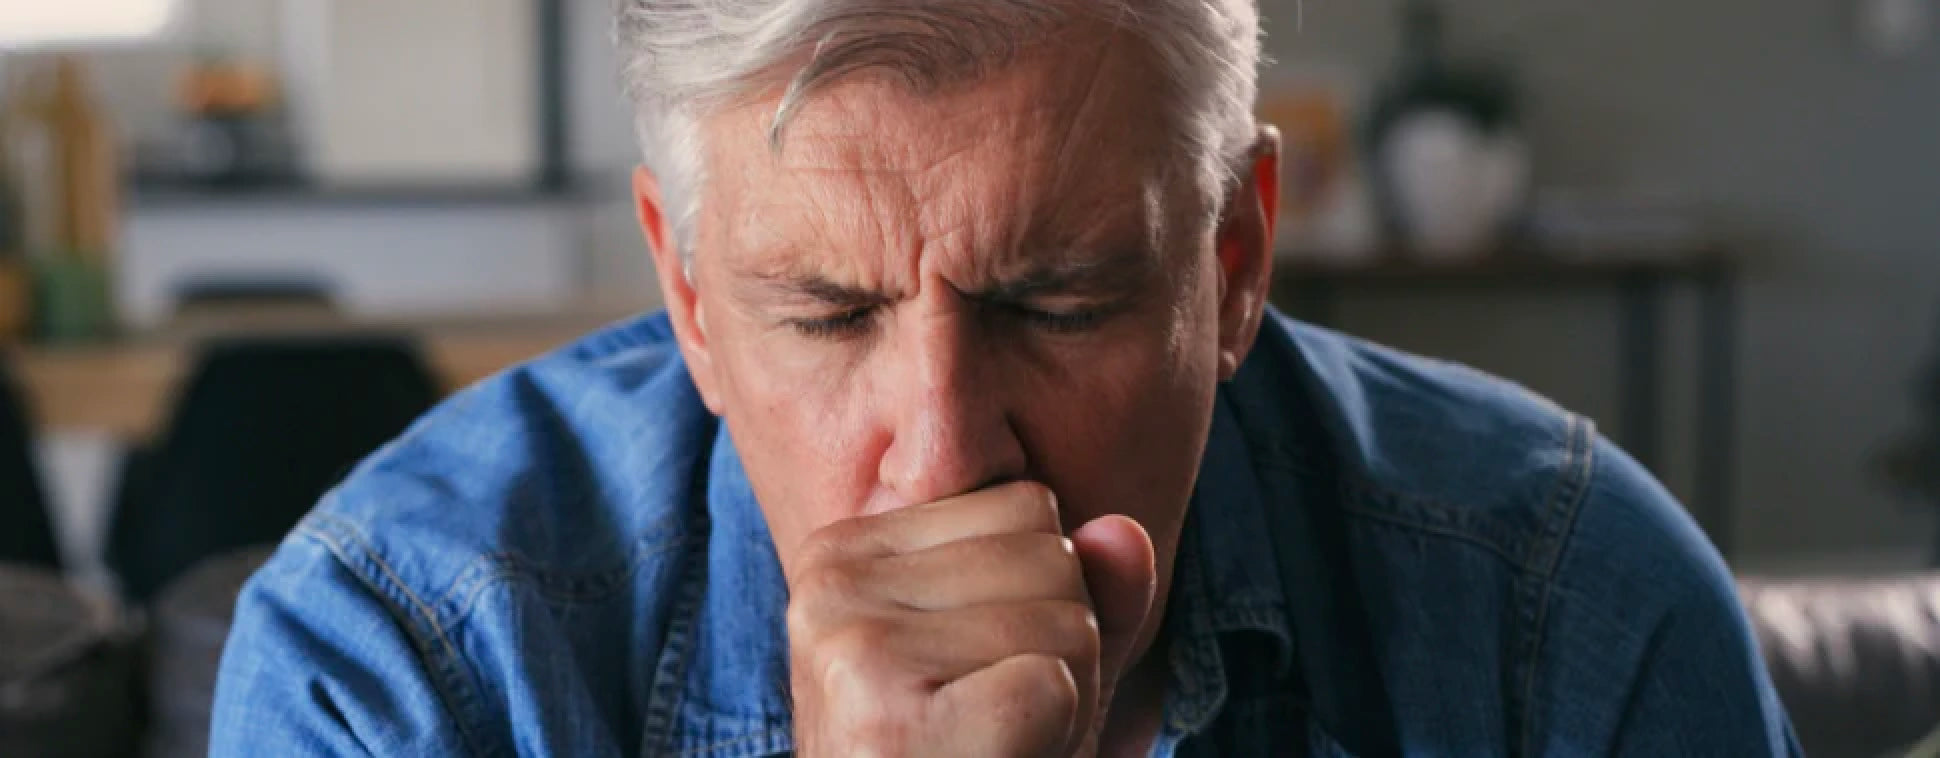 Can Coughing Cause a Hernia?